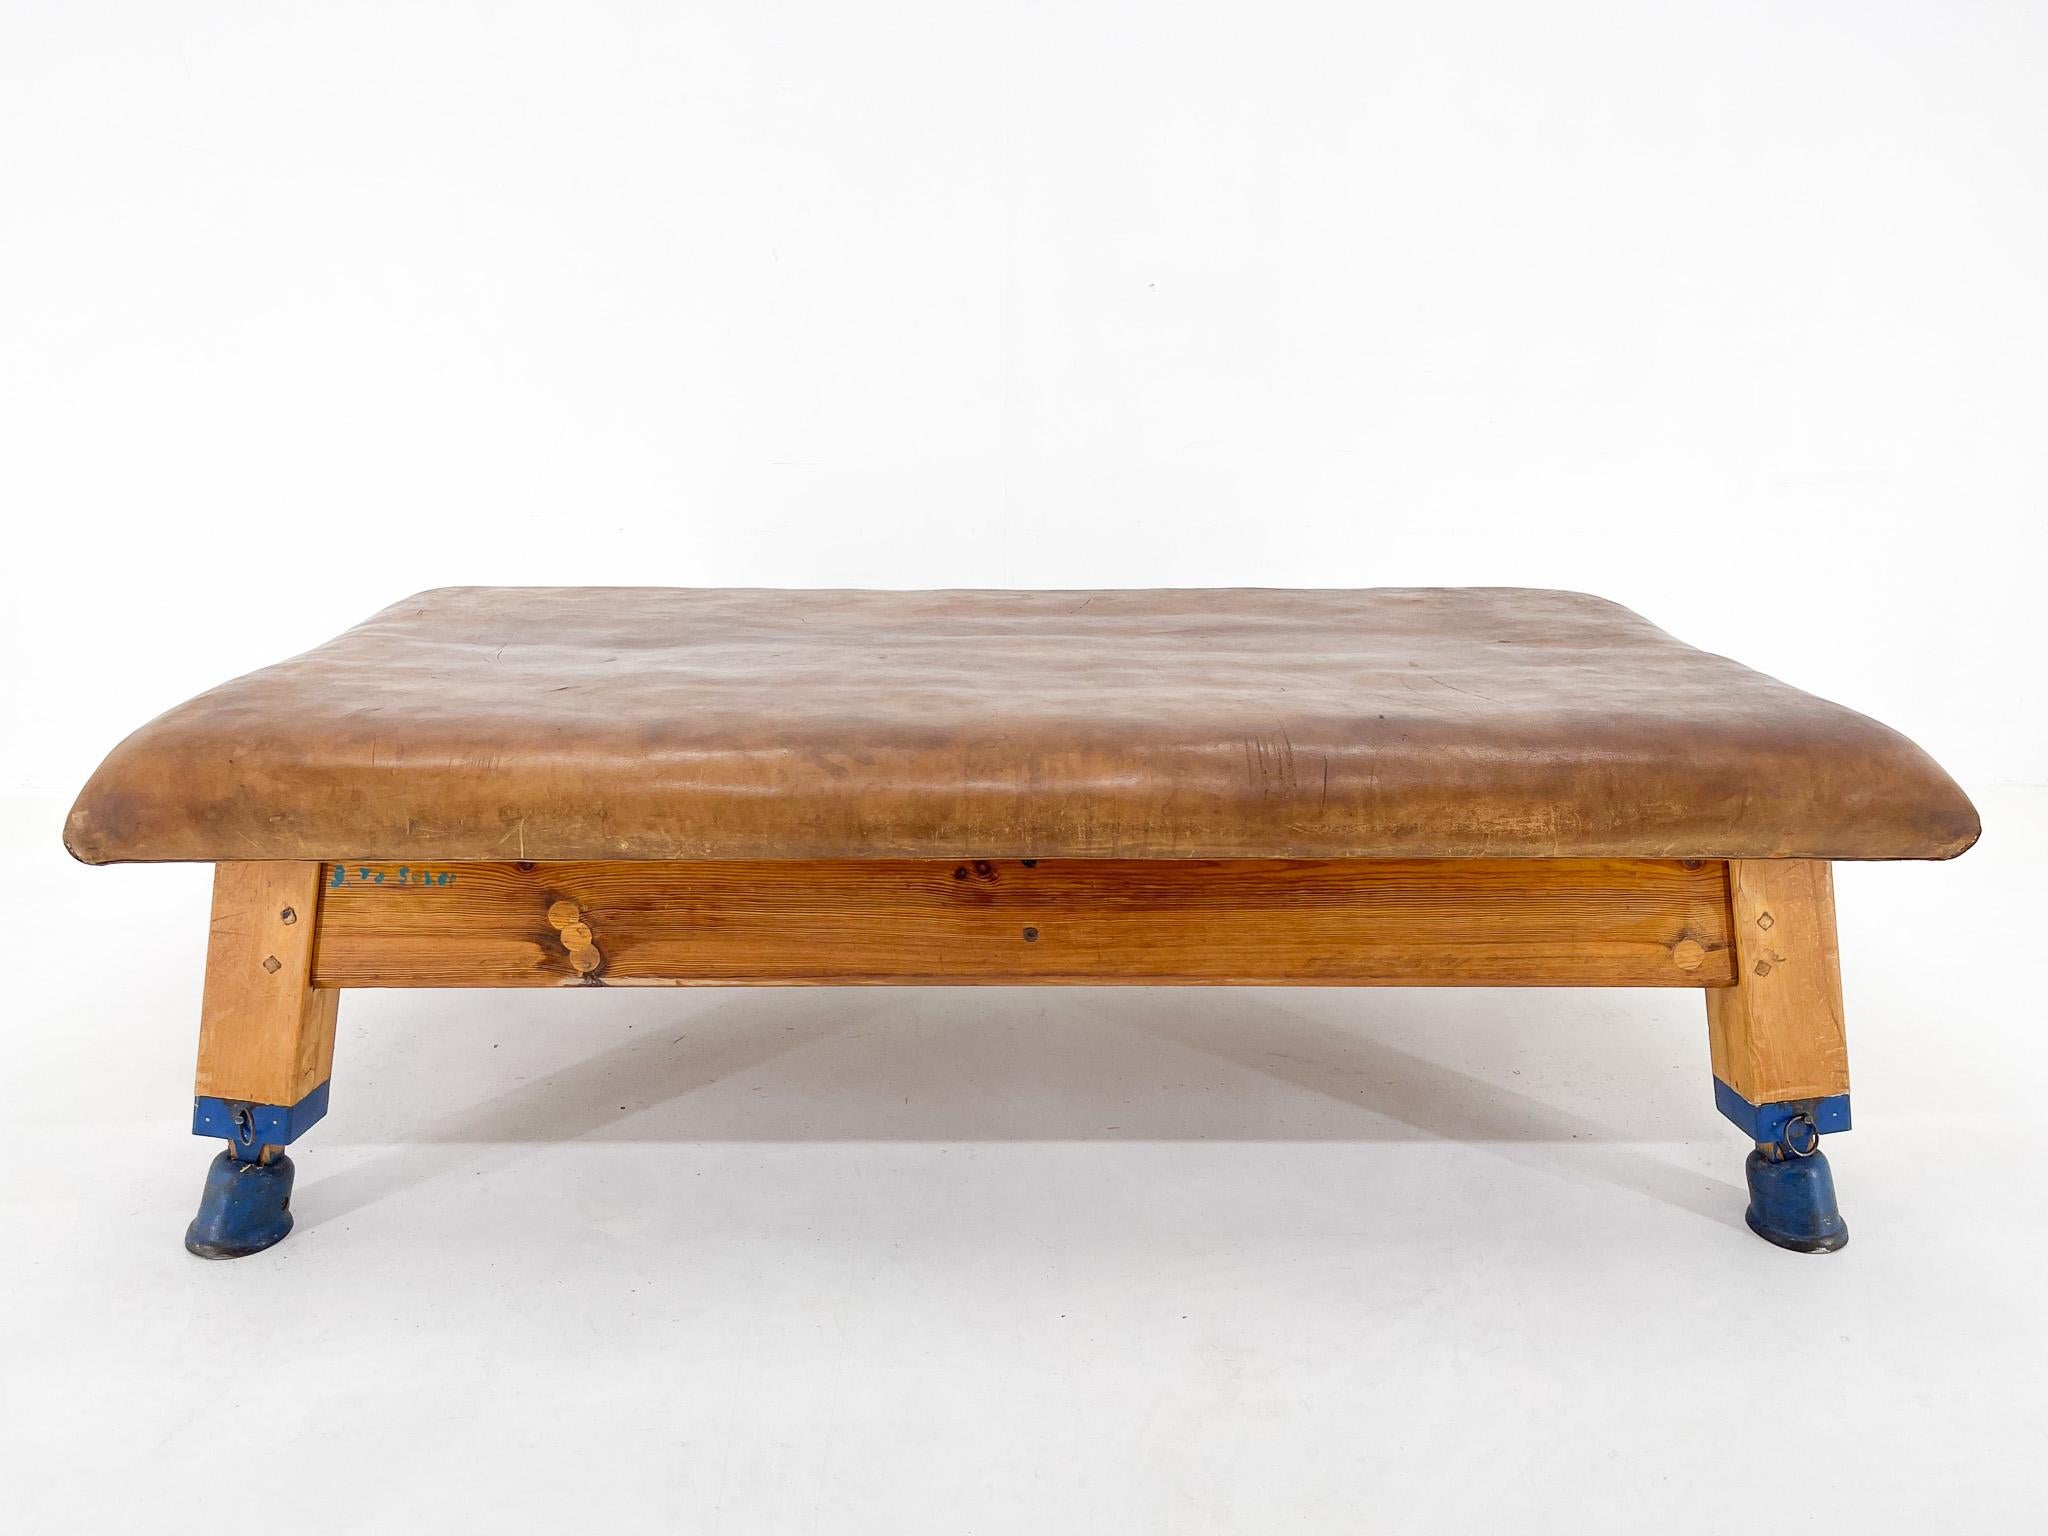 A very sturdy, unusualy large, heavy vintage gym bench with a patinated leather covered top that is set into a solid wooden bench frame. The legs have been shortened. All parts are original. The bench was salvaged from a gymnasium in the former